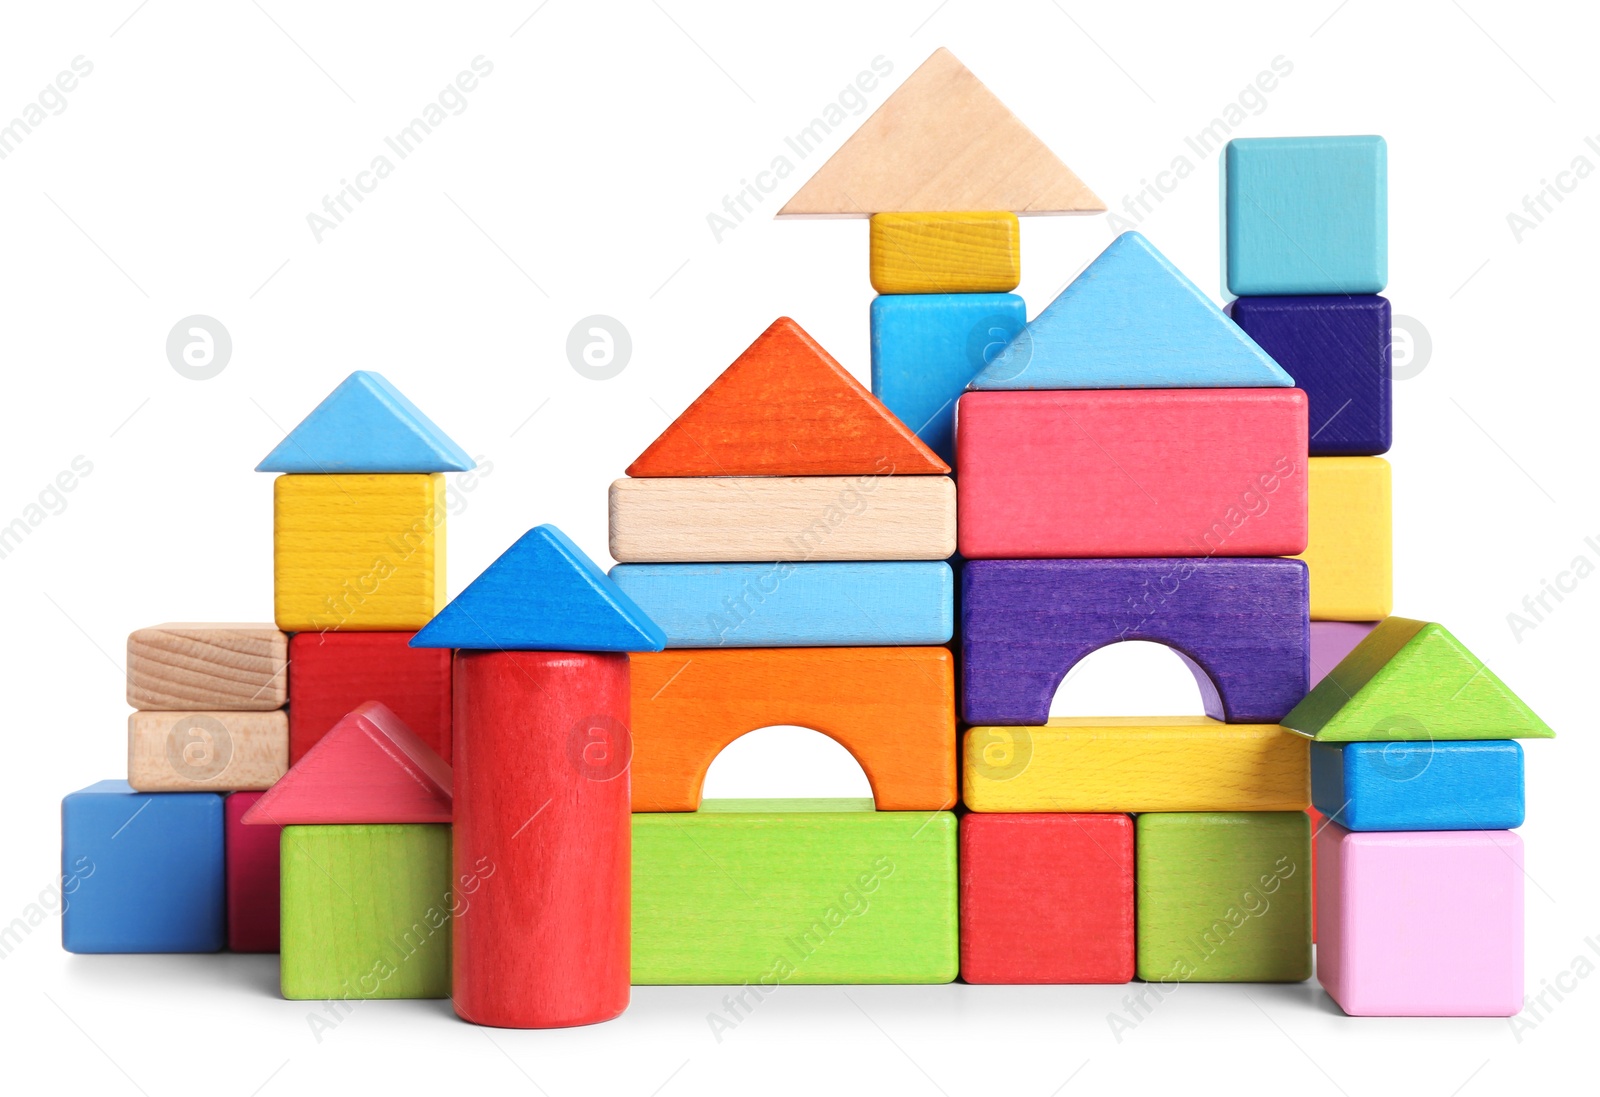 Photo of Toy castle made of bright building blocks on white background